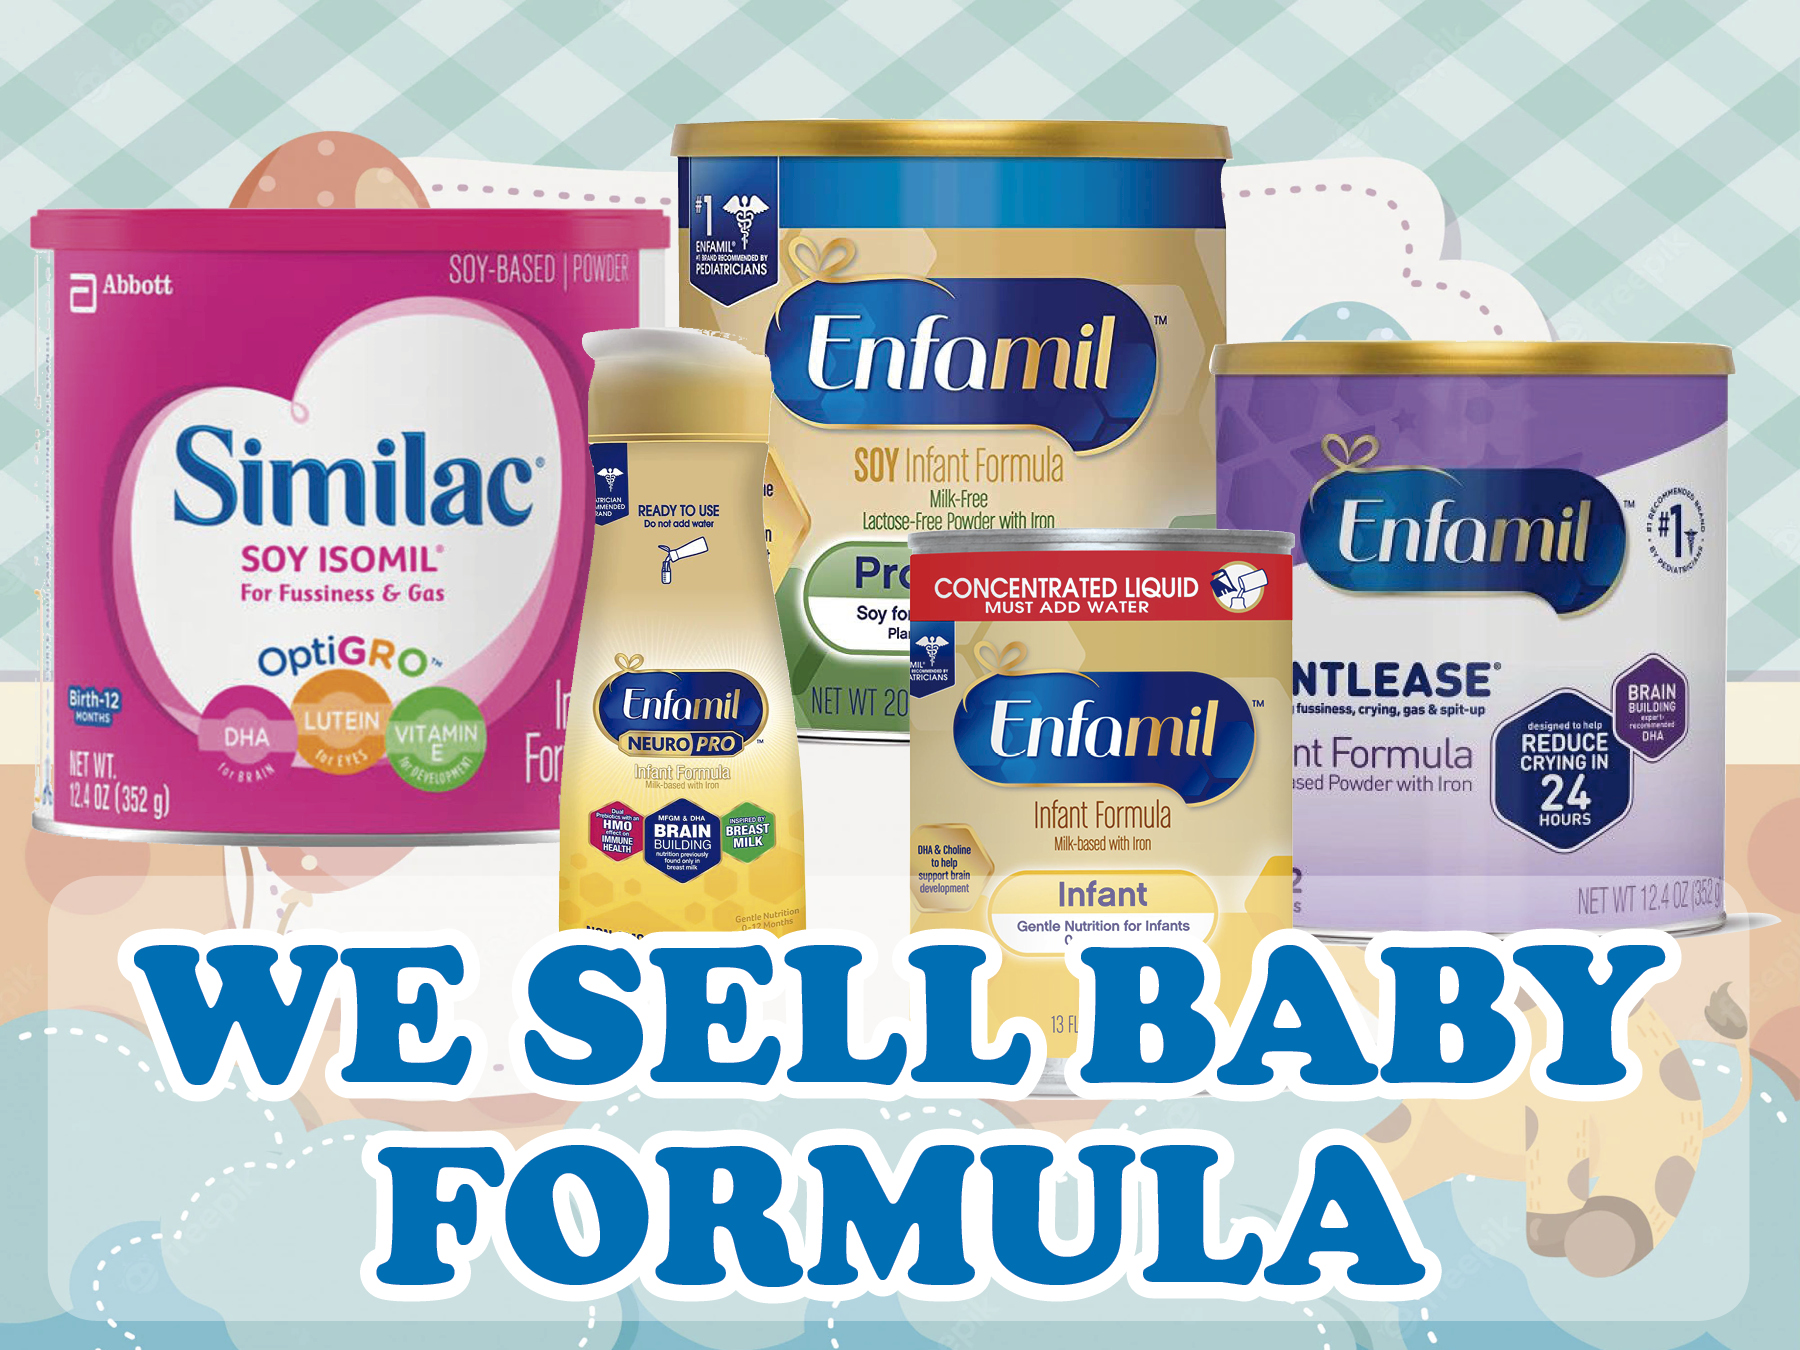 SOY-BASED | POWDER

 
       

Similac

For Fussiness & Gas

OptiGR.

en [TST

UST ADD WATER

_ NTLEASE'

1 Wssiness, crying, 9as § spit-up (mts ¥

nt Formula (EERE

ised Powder with Iron 24 I
mm

ror

        

   

 
  

~

Infant

Gonde Nurtion for Infants

WE SELL BABY.
FORMULA